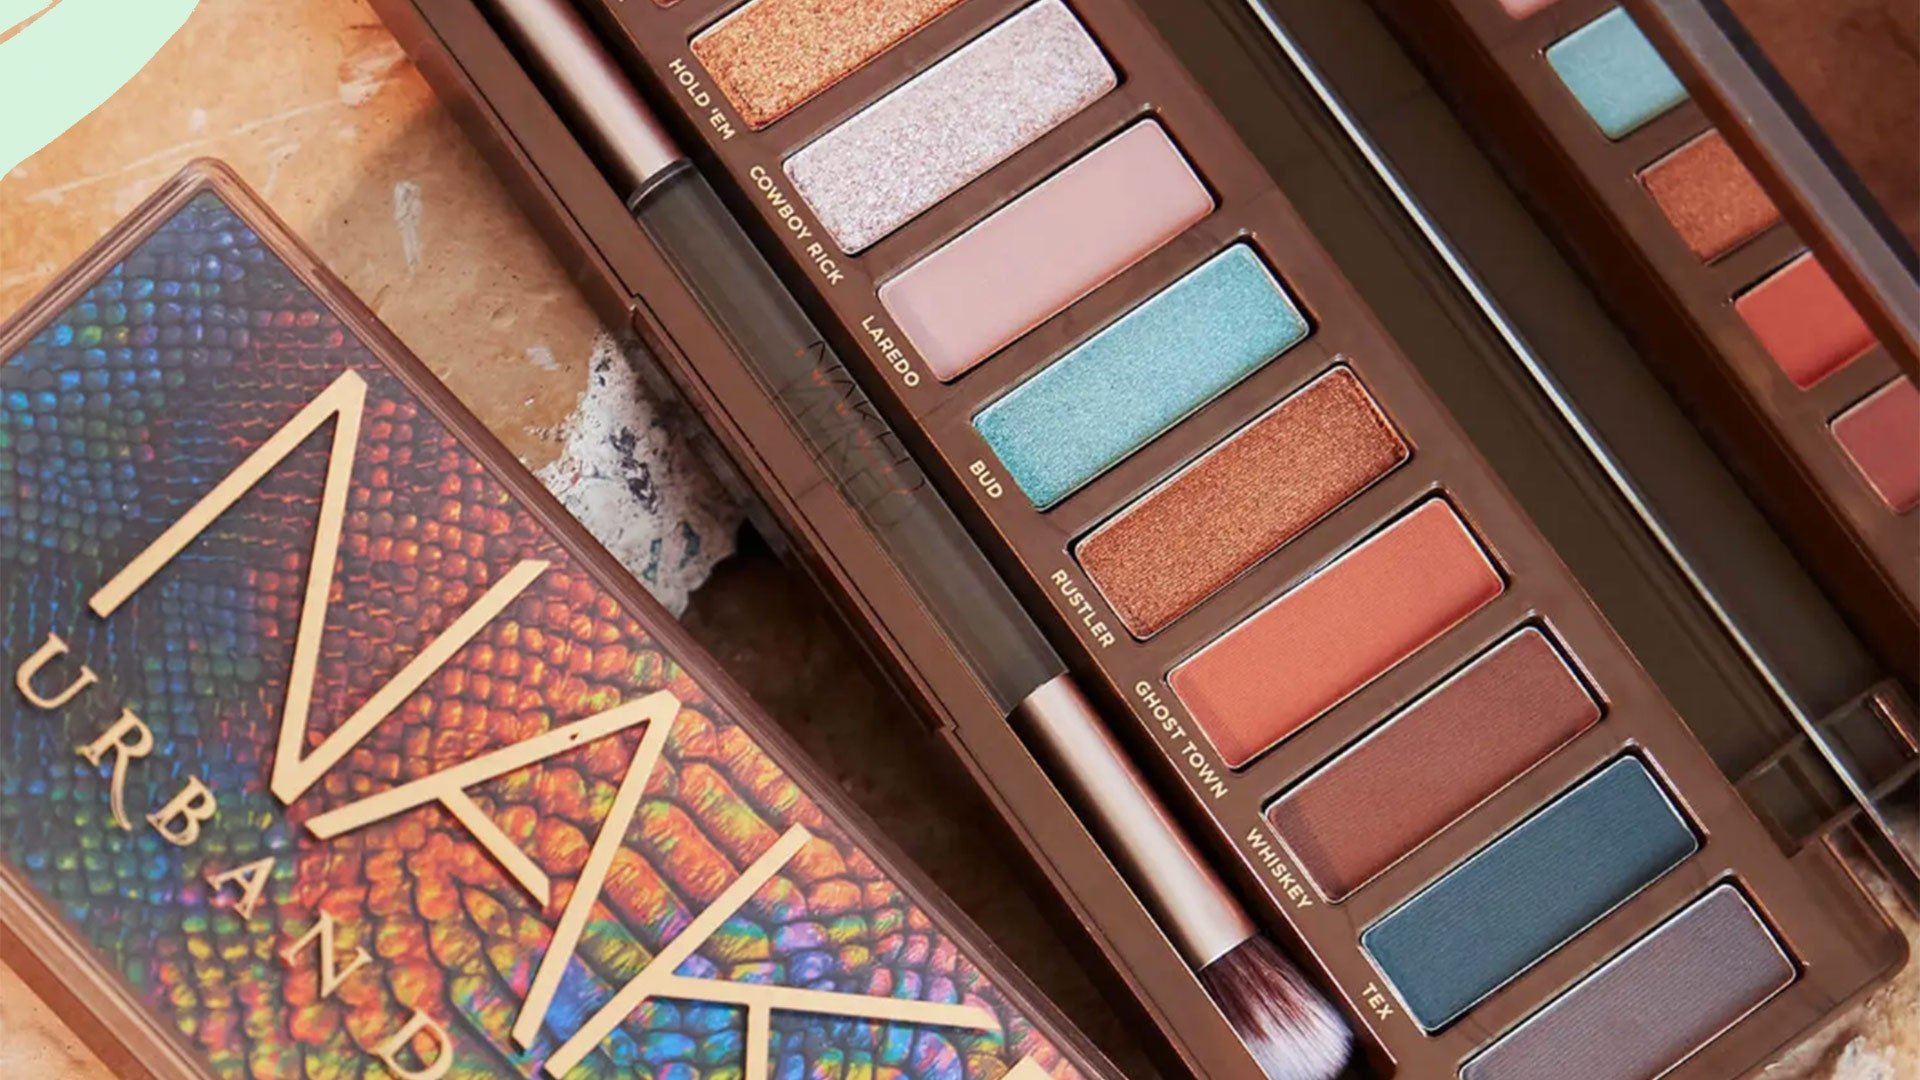 You can get 30% off Naked eyeshadow palettes in the Urban Decay Black Friday sale